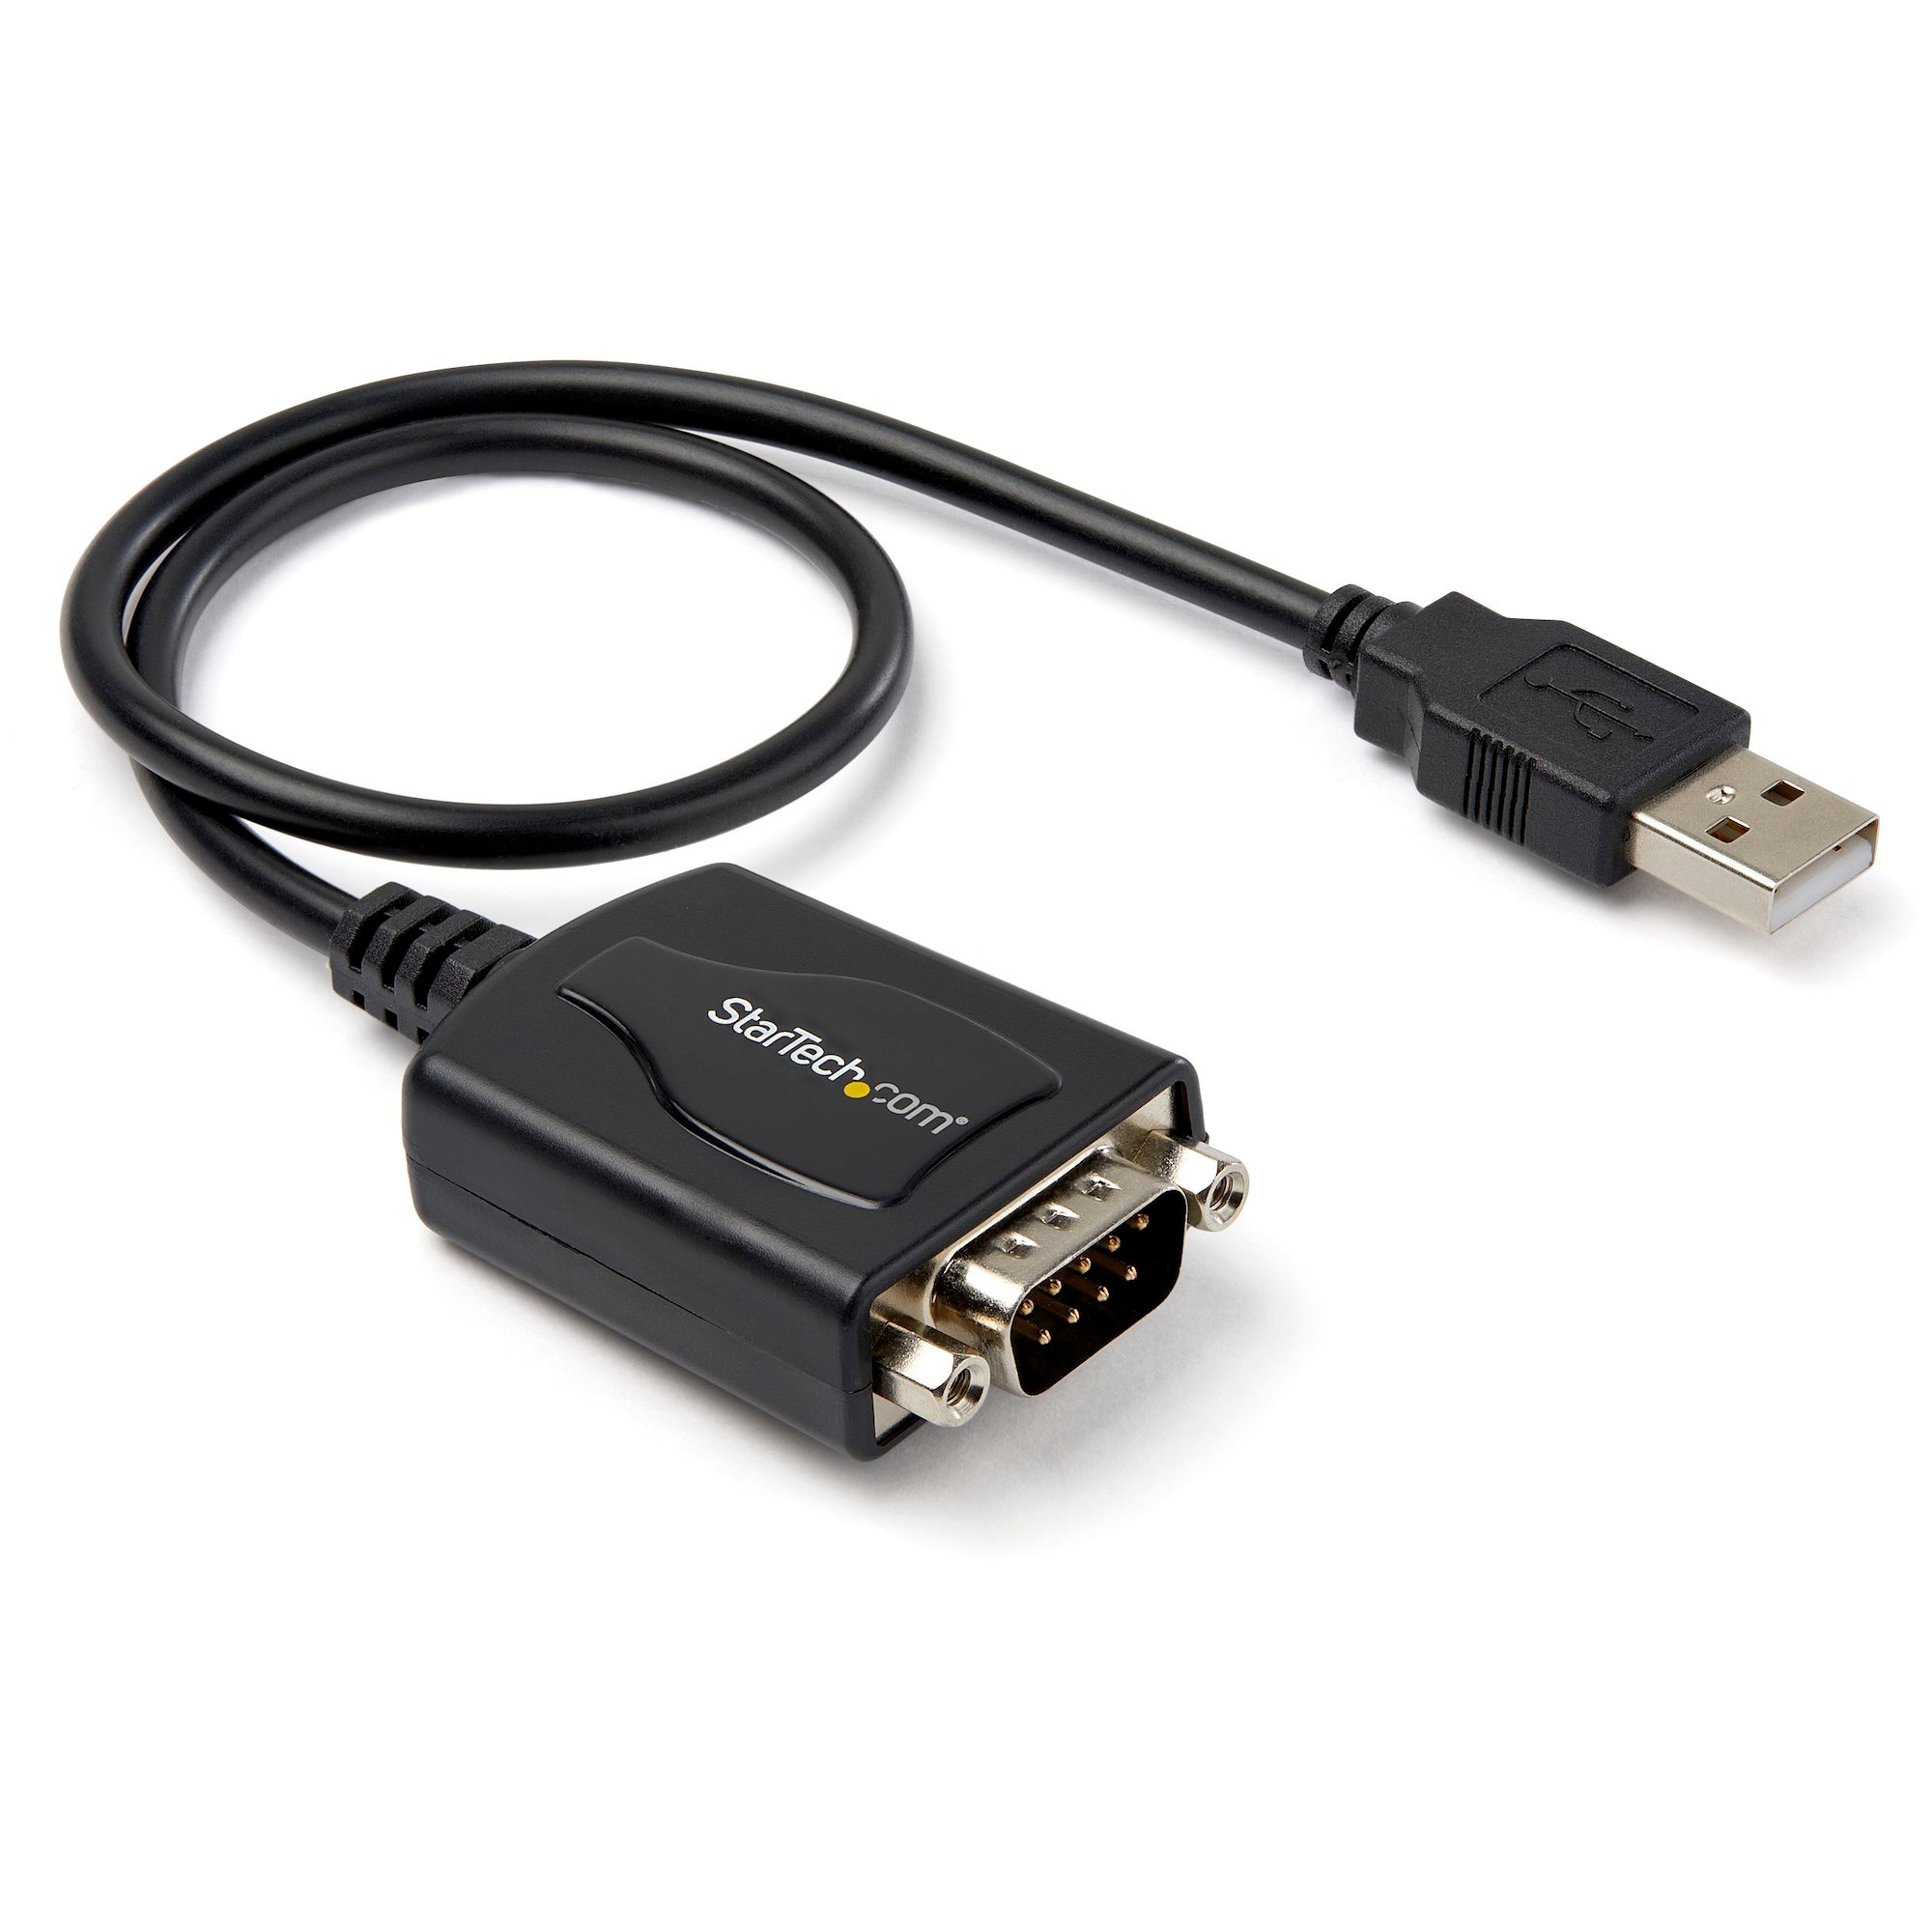 StarTech.com 1 Port Professional USB to Serial Adapter Cable